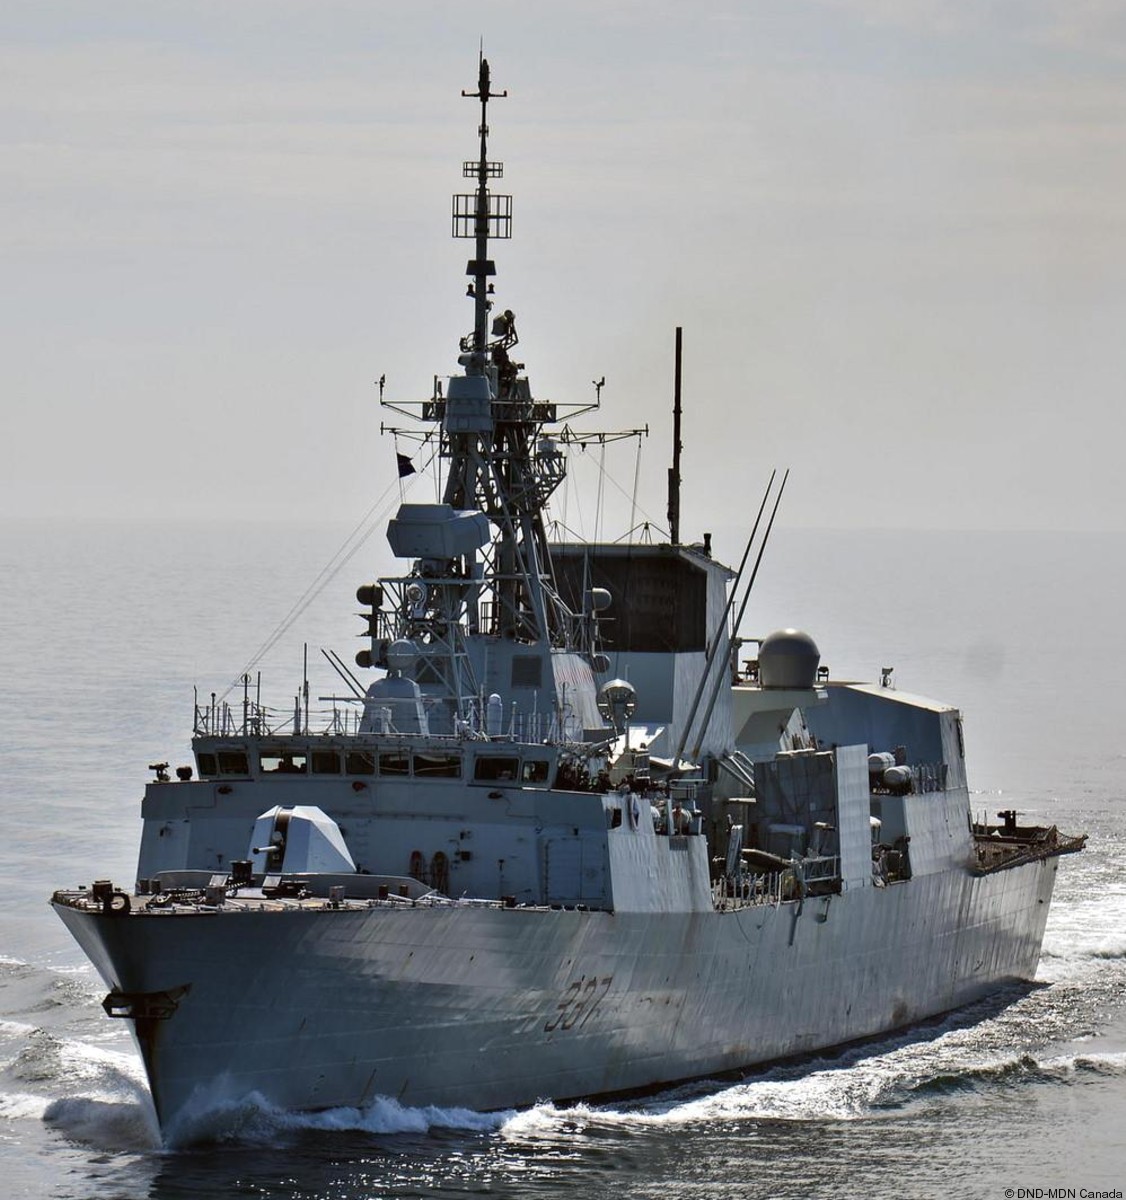 ffh-337 hmcs fredericton halifax class helicopter patrol frigate ncsm royal canadian navy 25